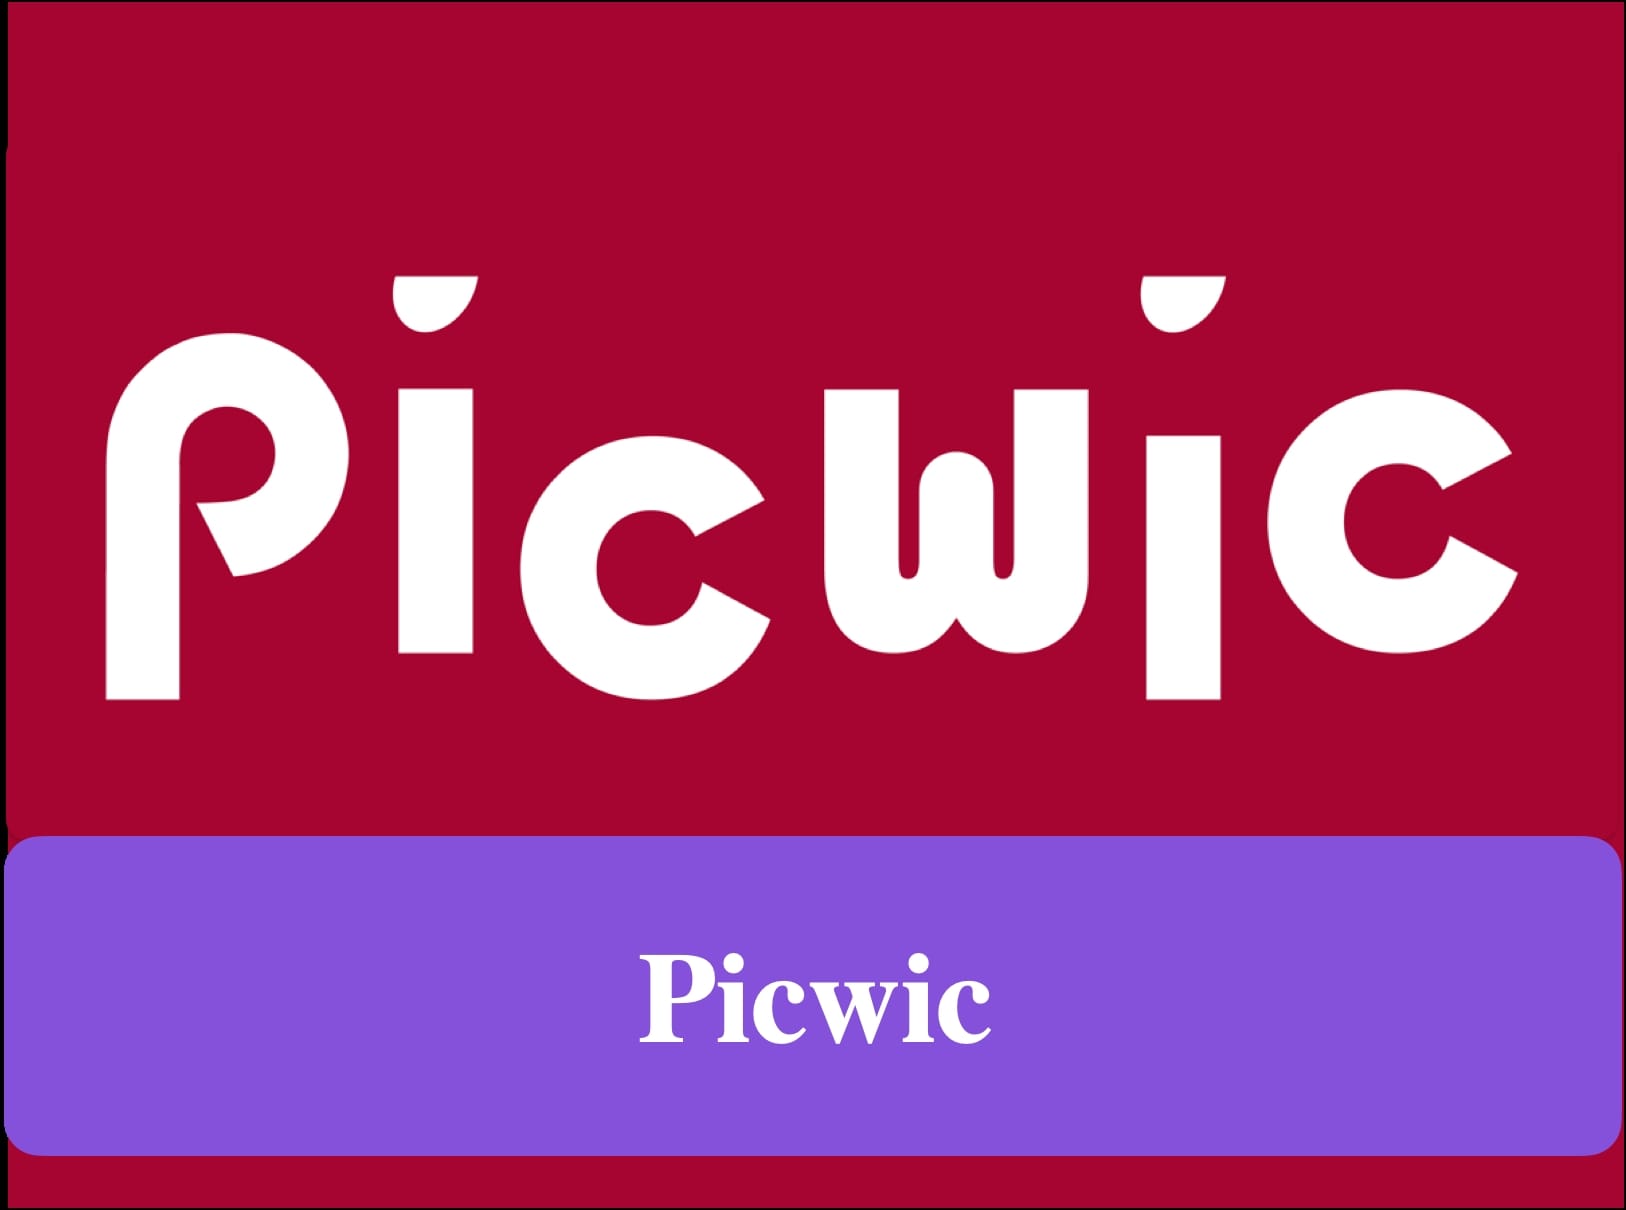 AI image generation is made easy with Picwic